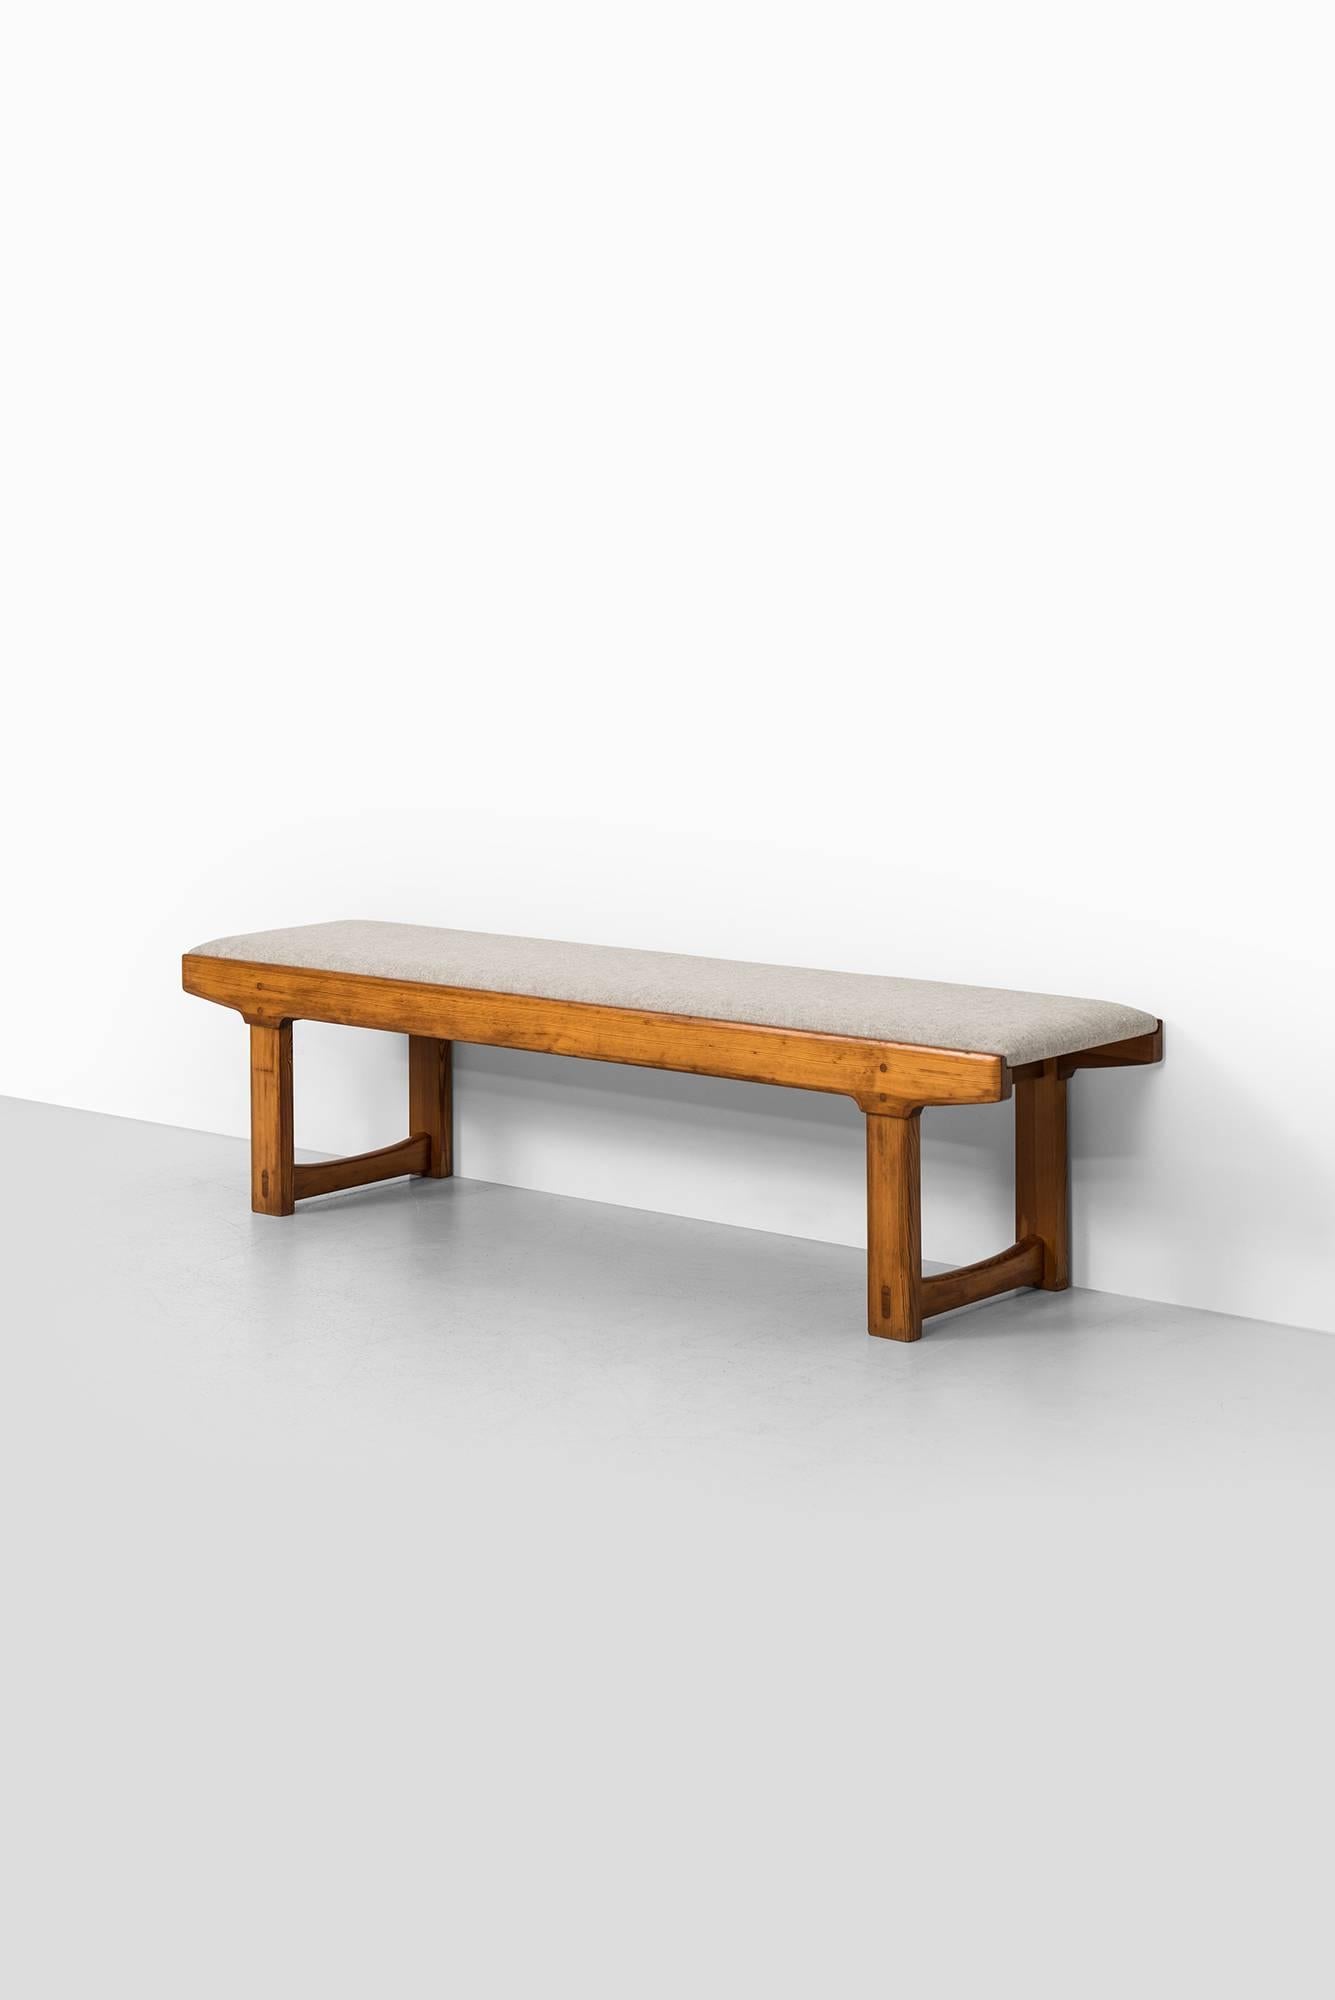 Scandinavian Modern Bench in Oregon Pine and Linen Fabric Produced in Sweden